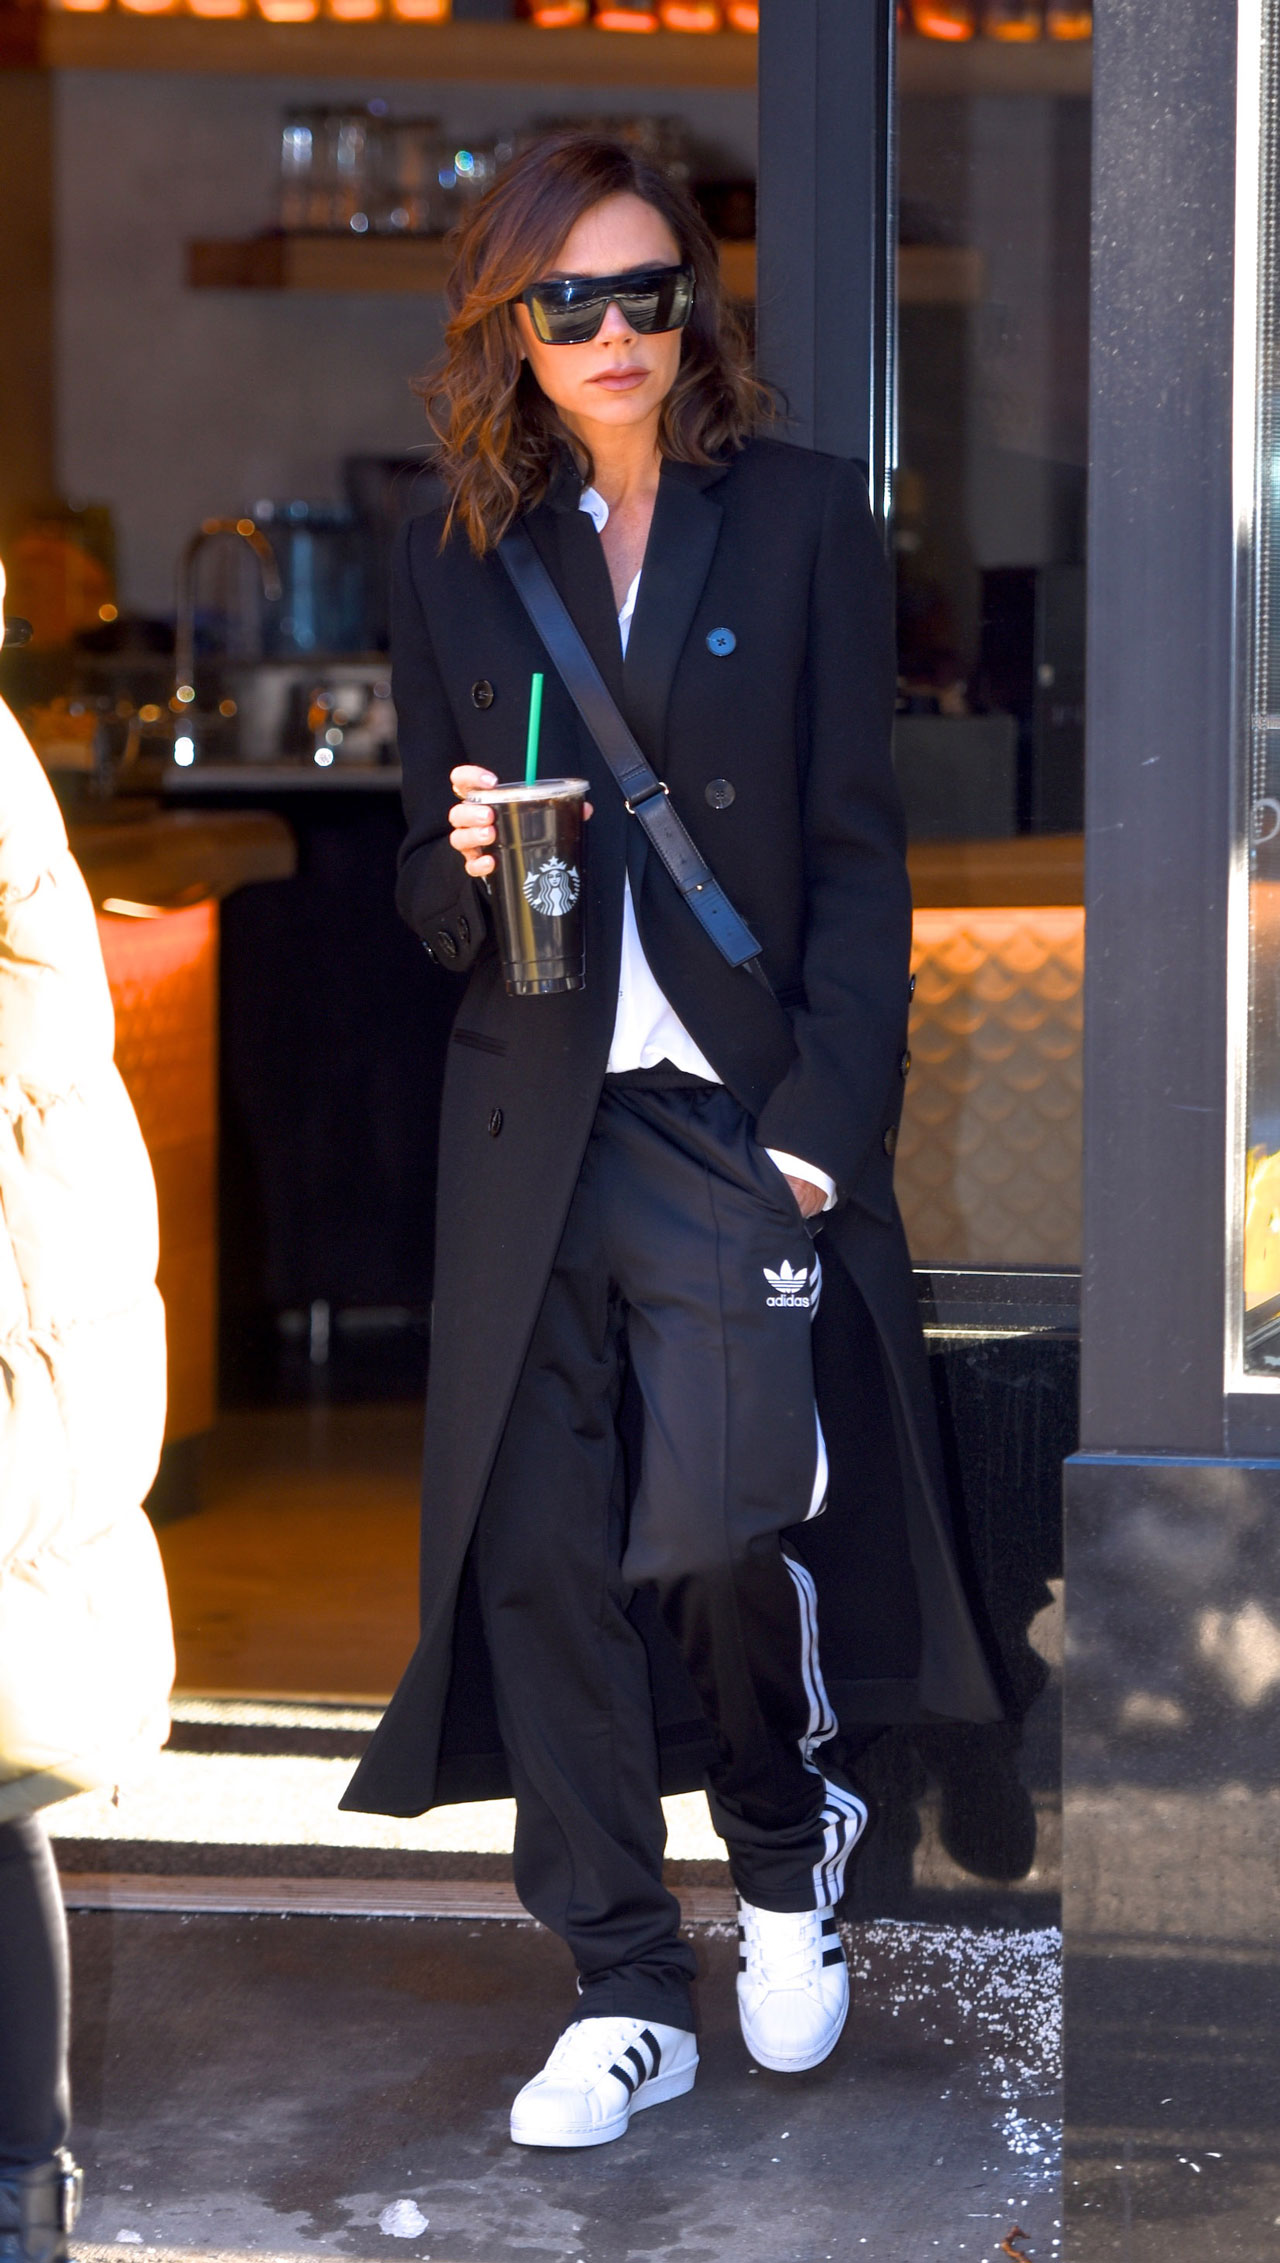 We finally know why Victoria Beckham has fallen in love with white trainers